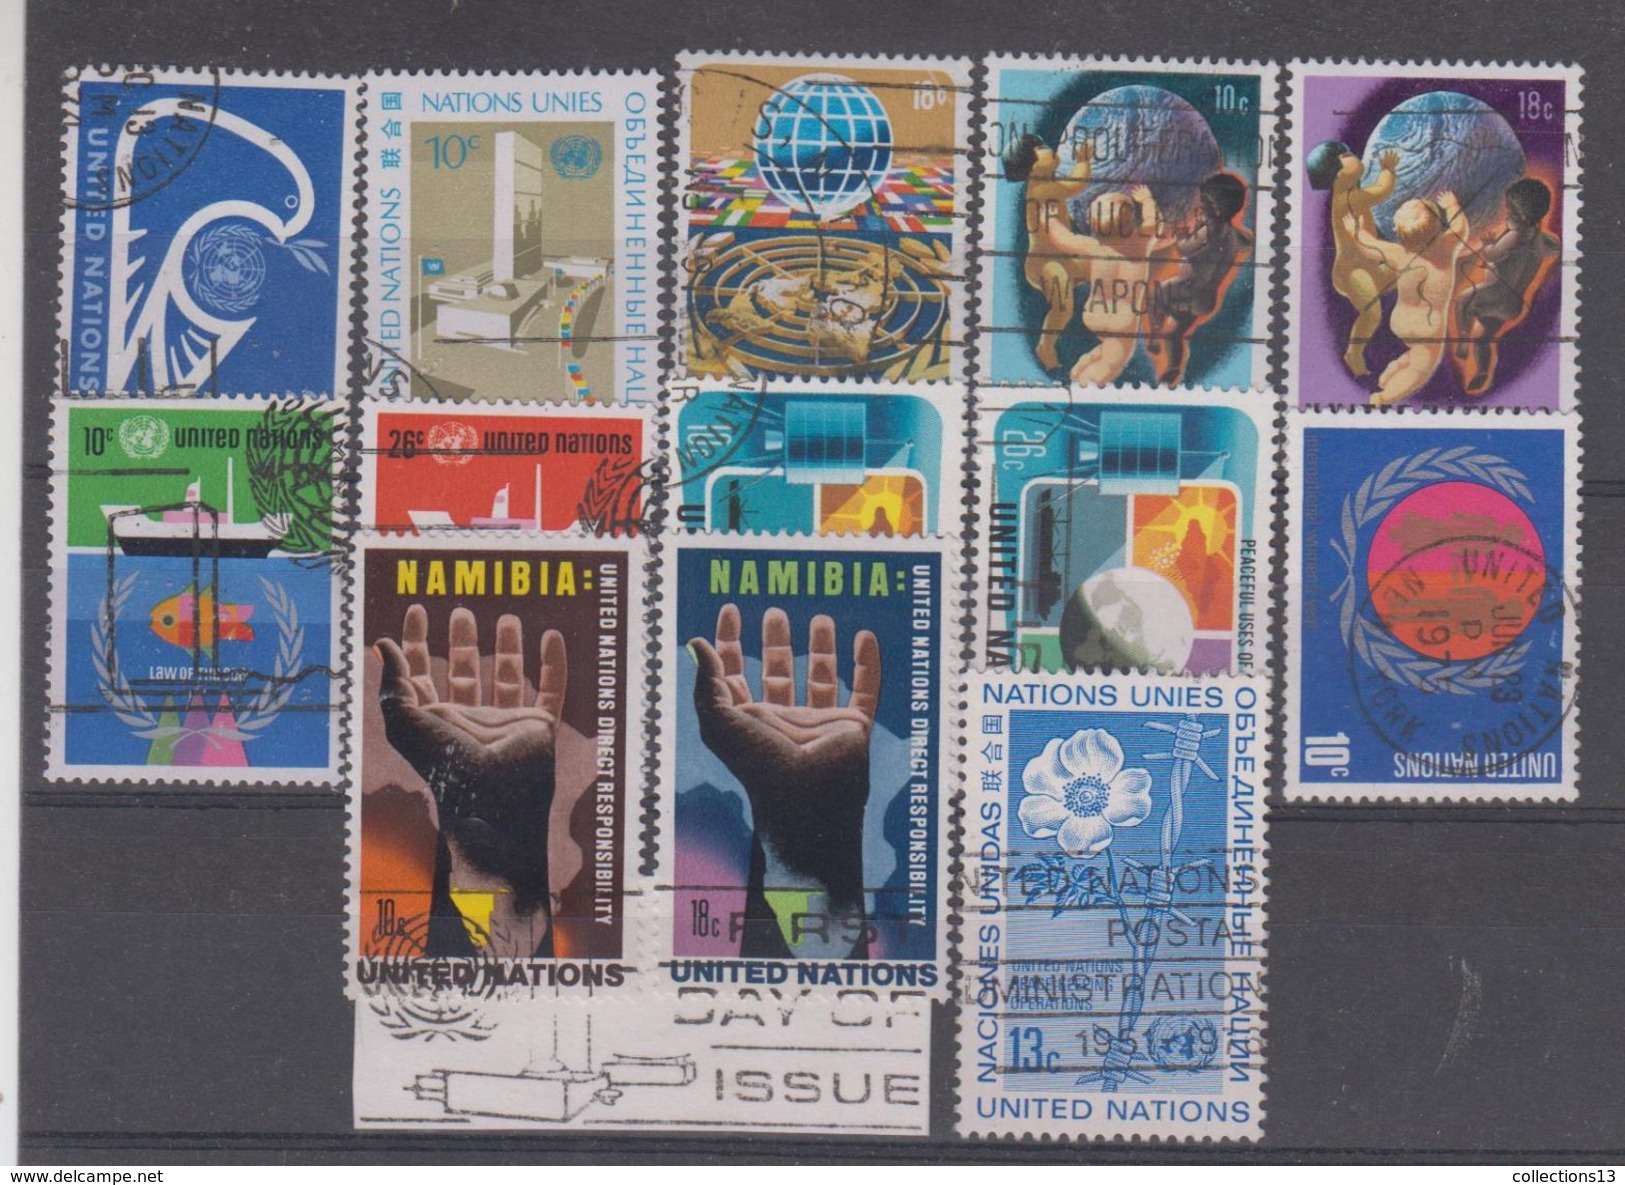 NATIONS UNIS - NEW YORK - 242/251 + 255/287 + 259/264 + 266/268 Obli Cote 14,10 Euros Depart A 10% - Used Stamps